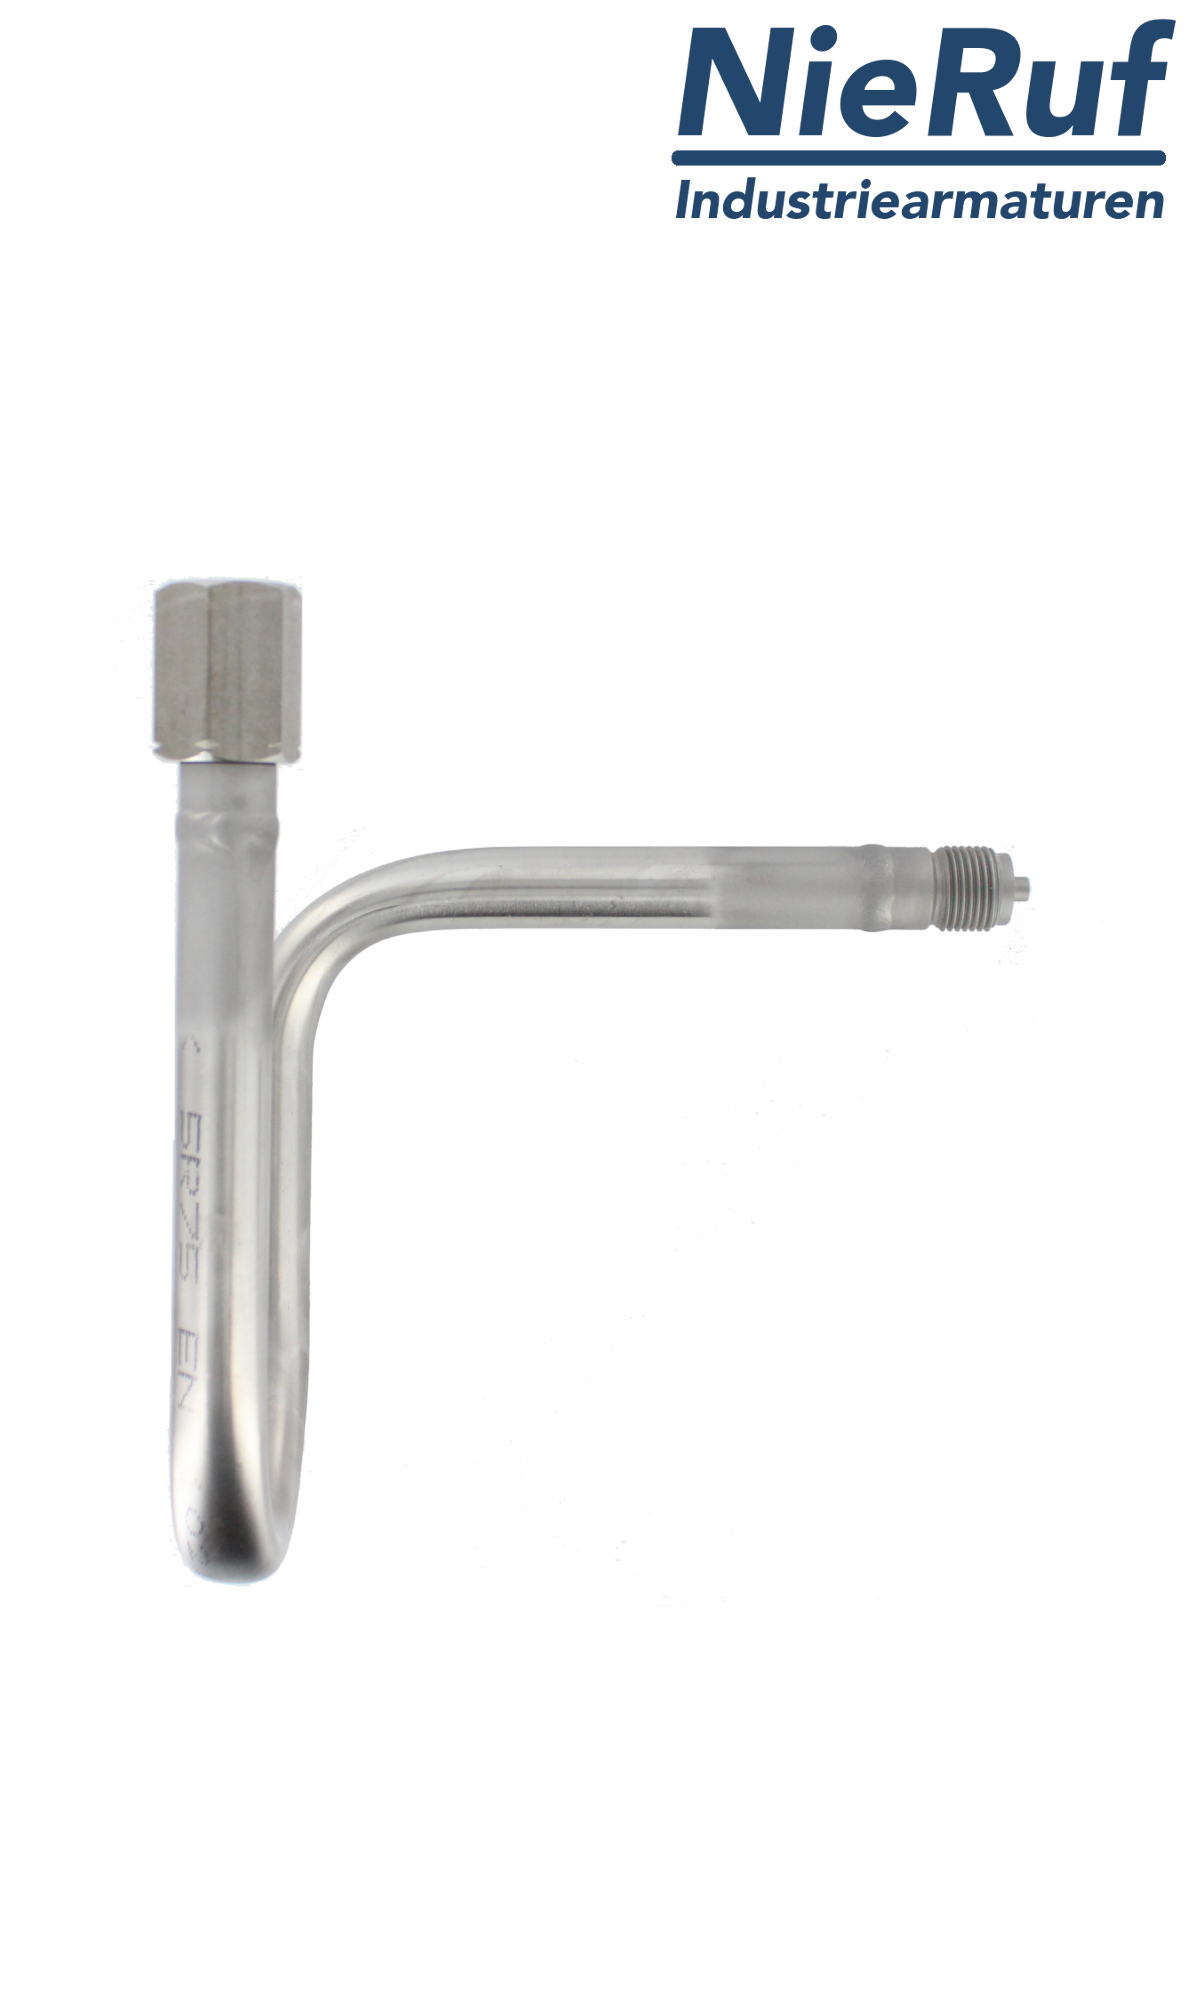 siphon stainless steel 1.4571 male thread x sleeve acc. to DIN 16282 - form A in U-shape flat